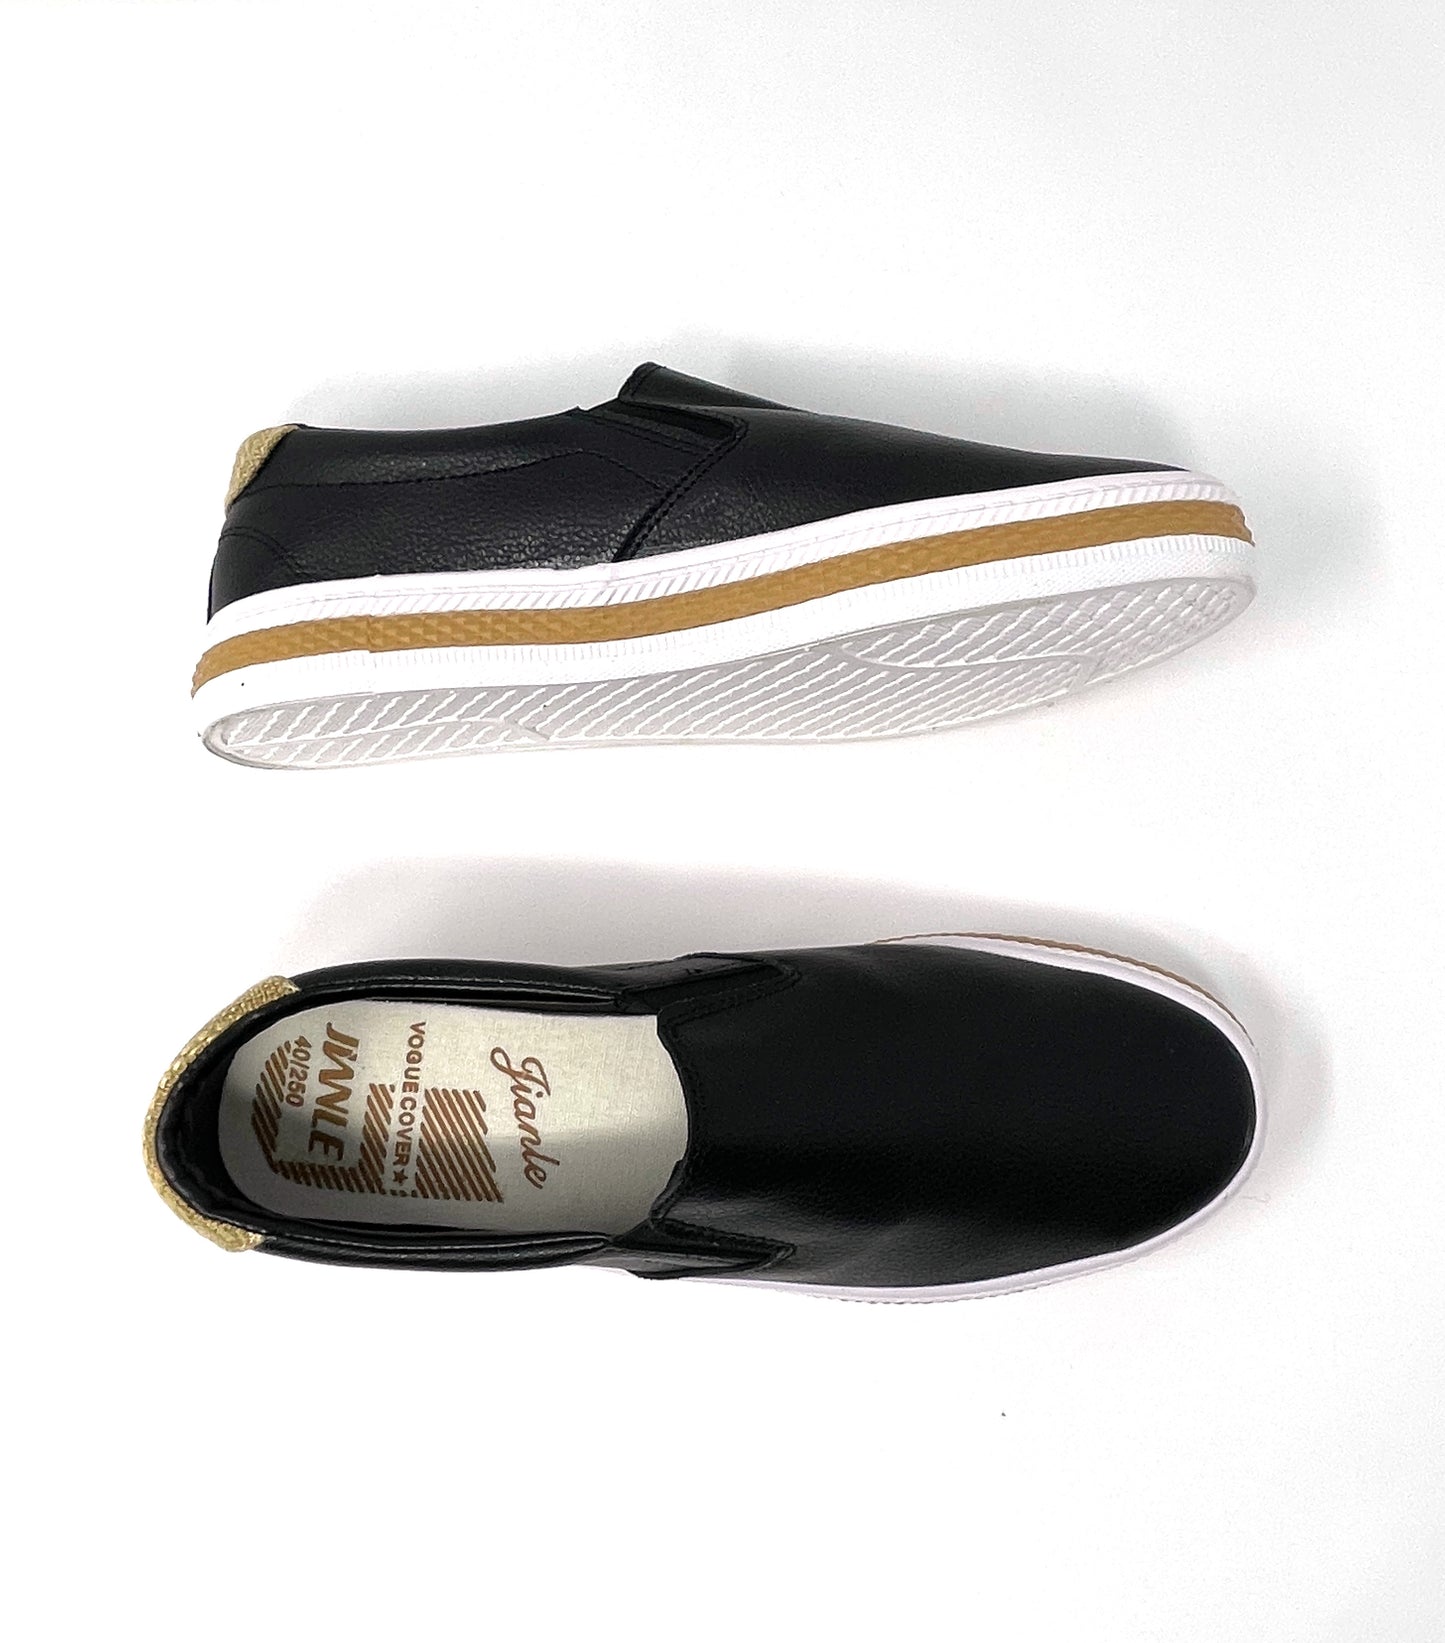 Casual Women's Flat Loafers